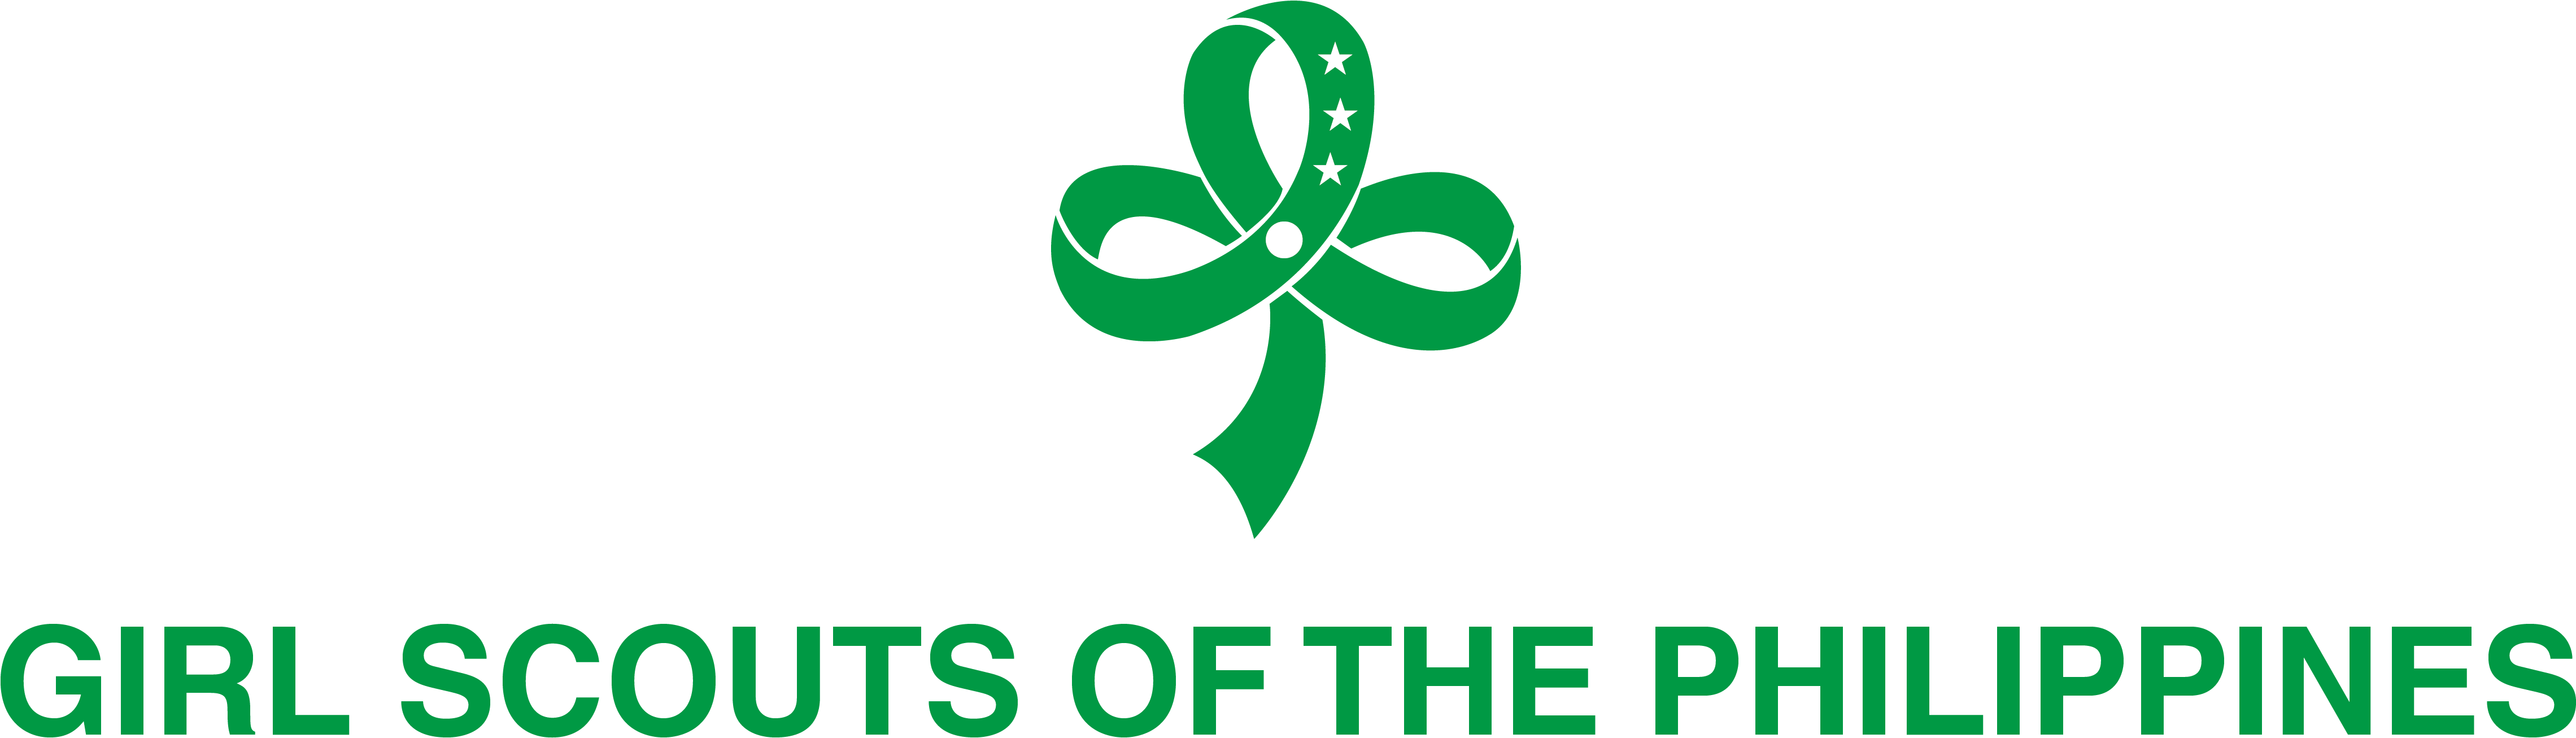 Gsp Logo - Girl Scout Of The Philippines Png (4800x1500)